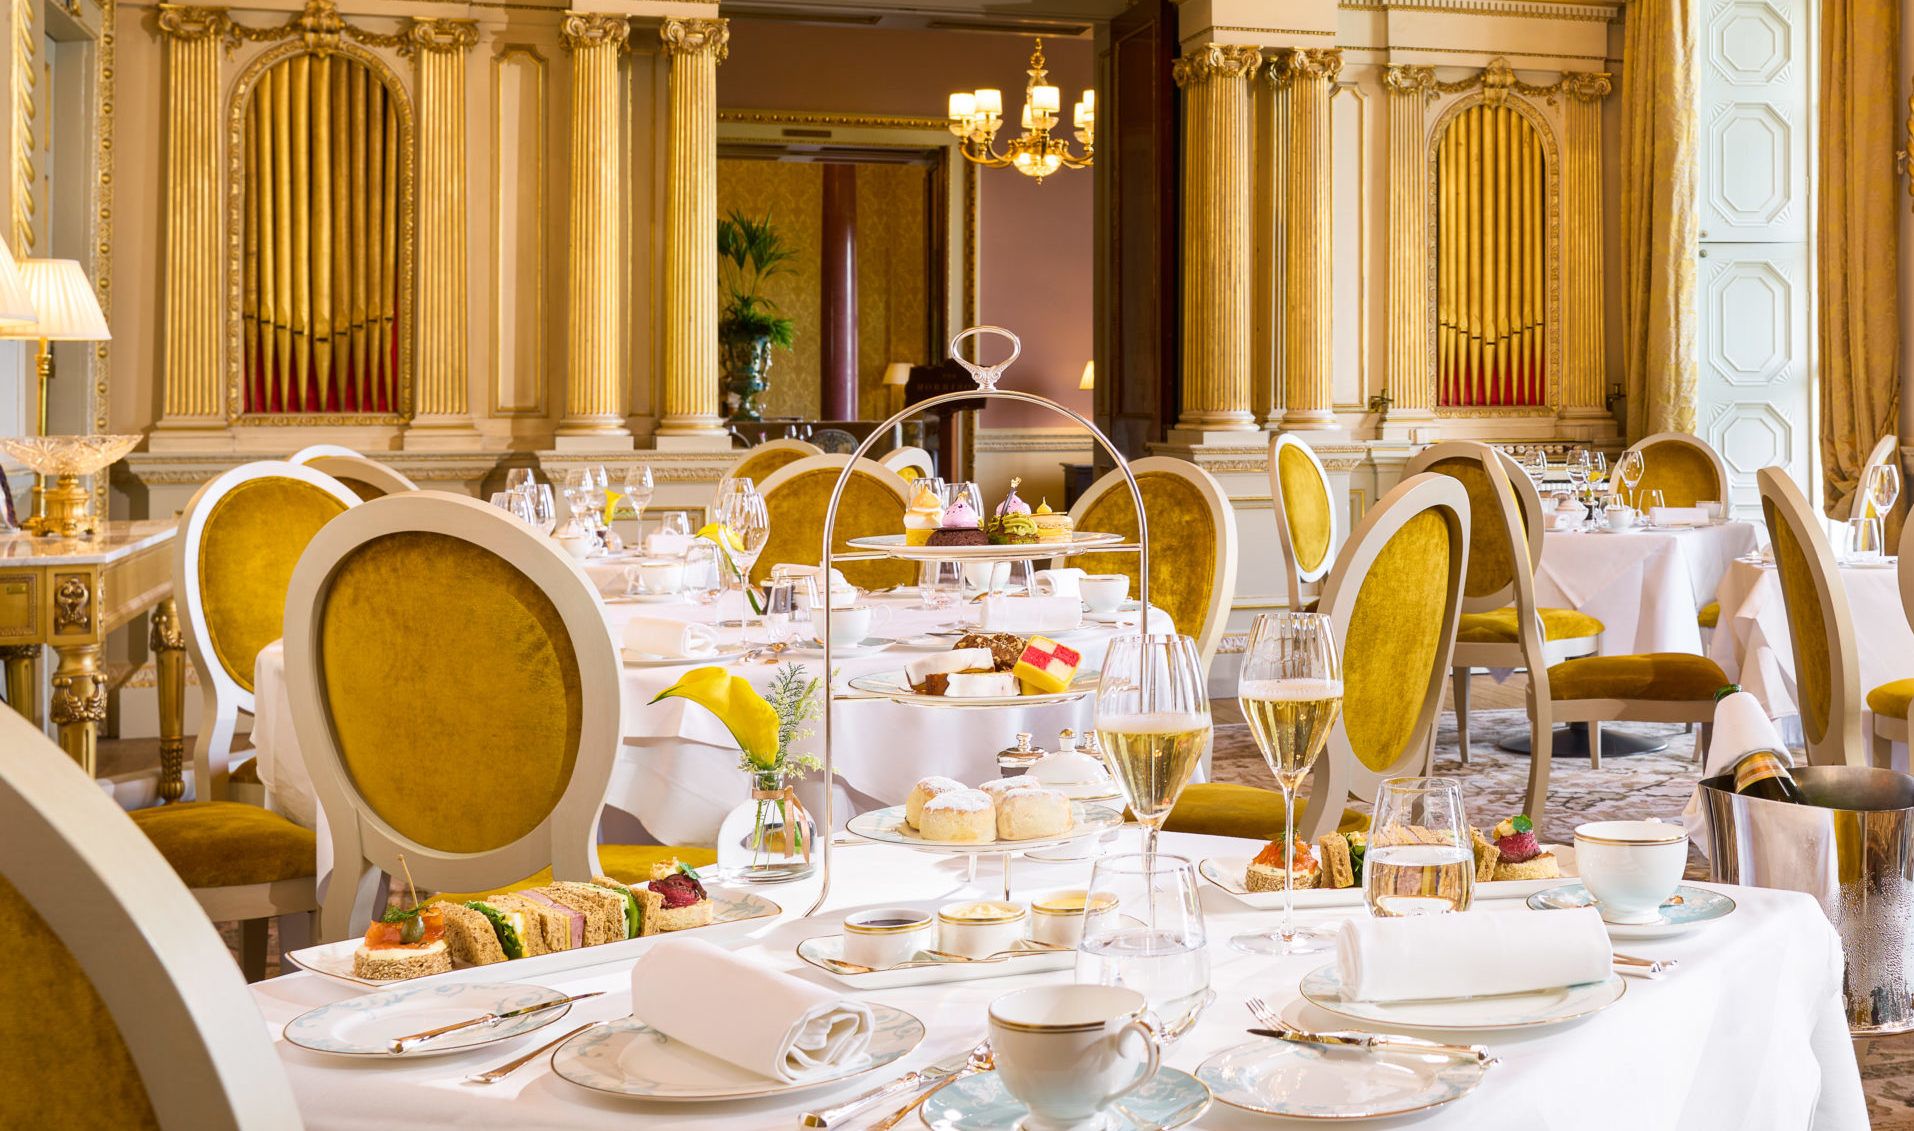 Become an aristocrat for the day at Carton House’s Afternoon Tea experience